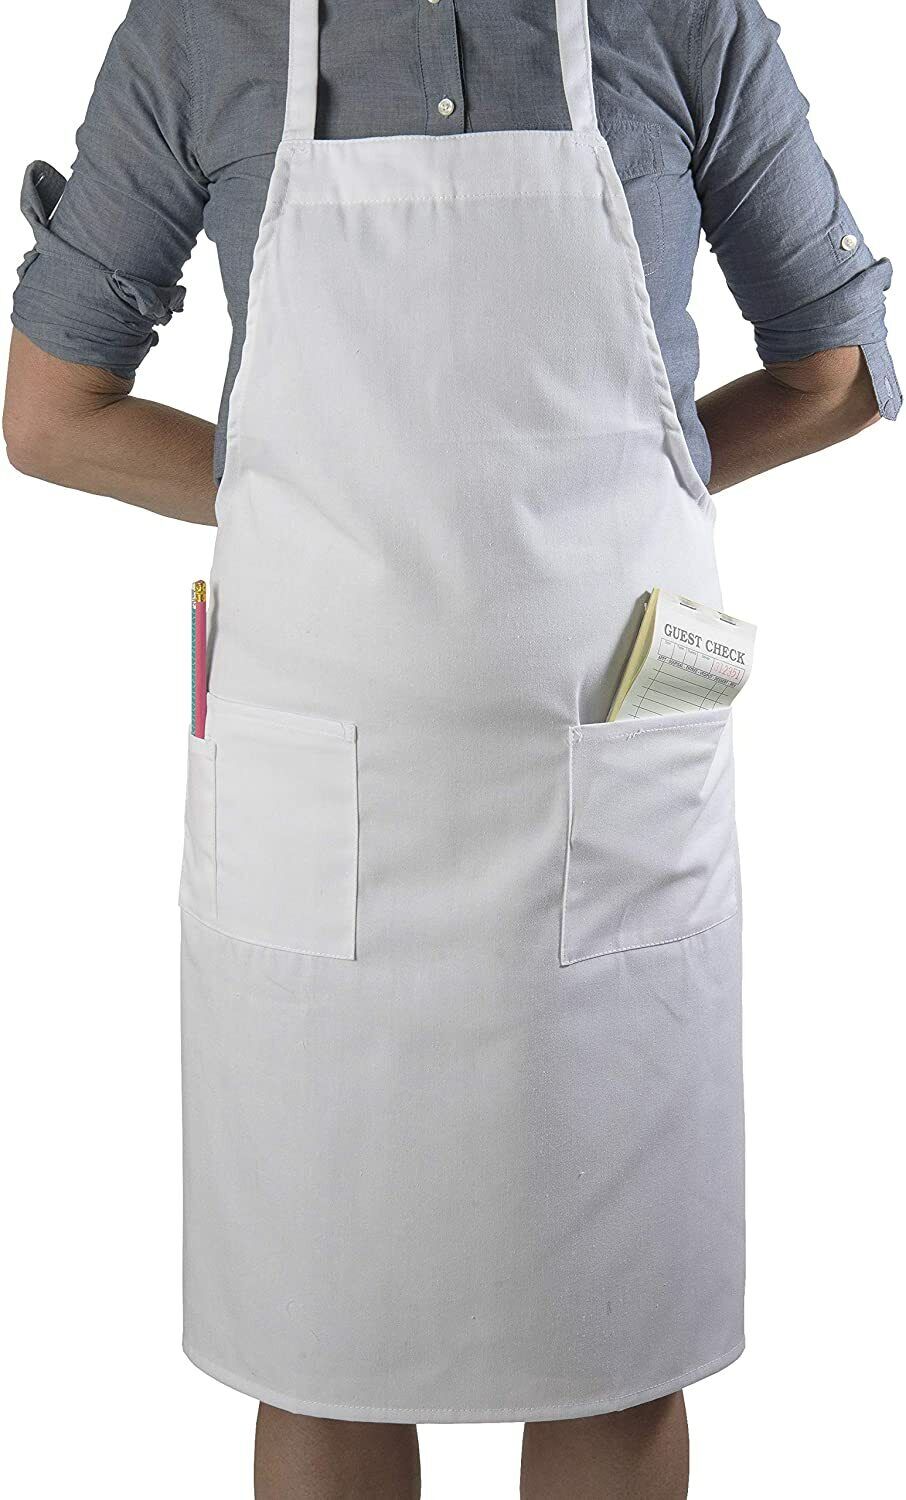 6 Pack Bib Aprons 2 Ultra-Cheap Deals Pouches Max 85% OFF Pen Whi Use Pocket 1 Restaurant